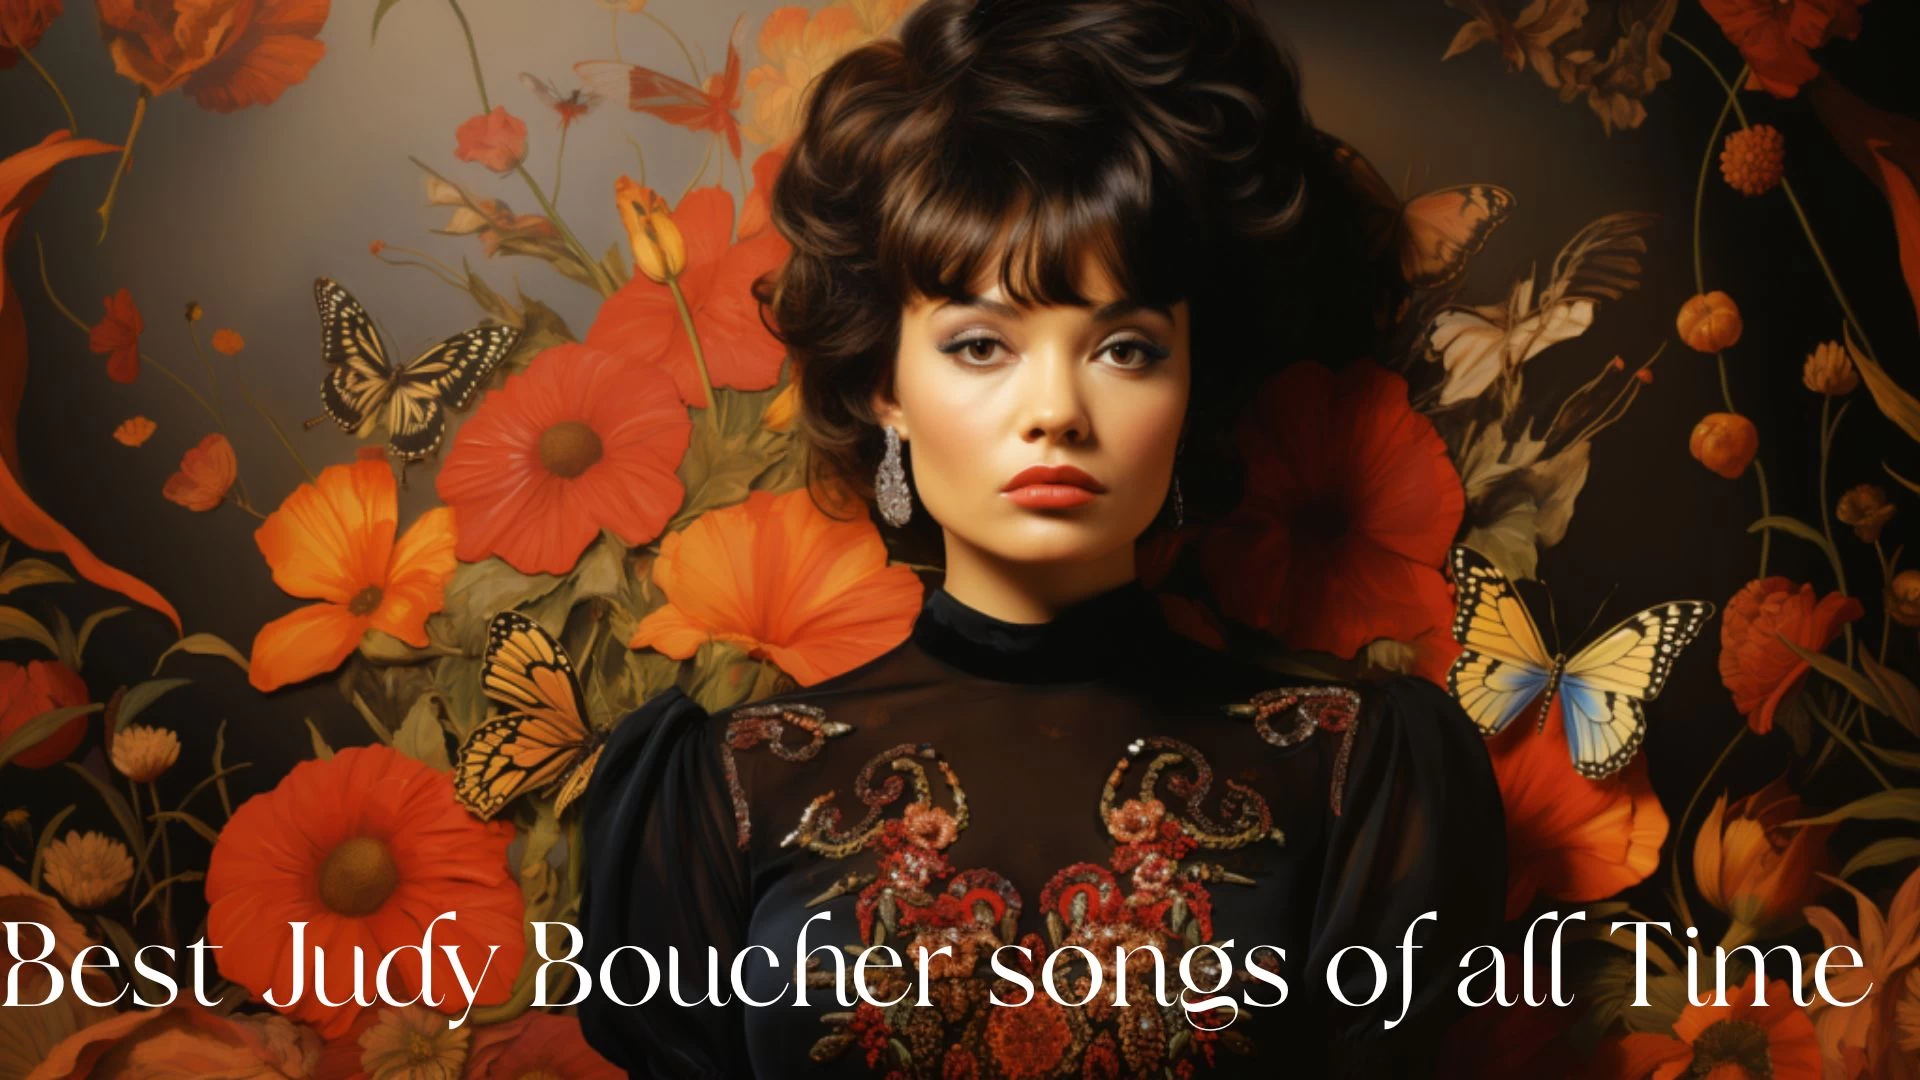 Best Judy Boucher Songs of All Time - Top 10 Timeless Magic